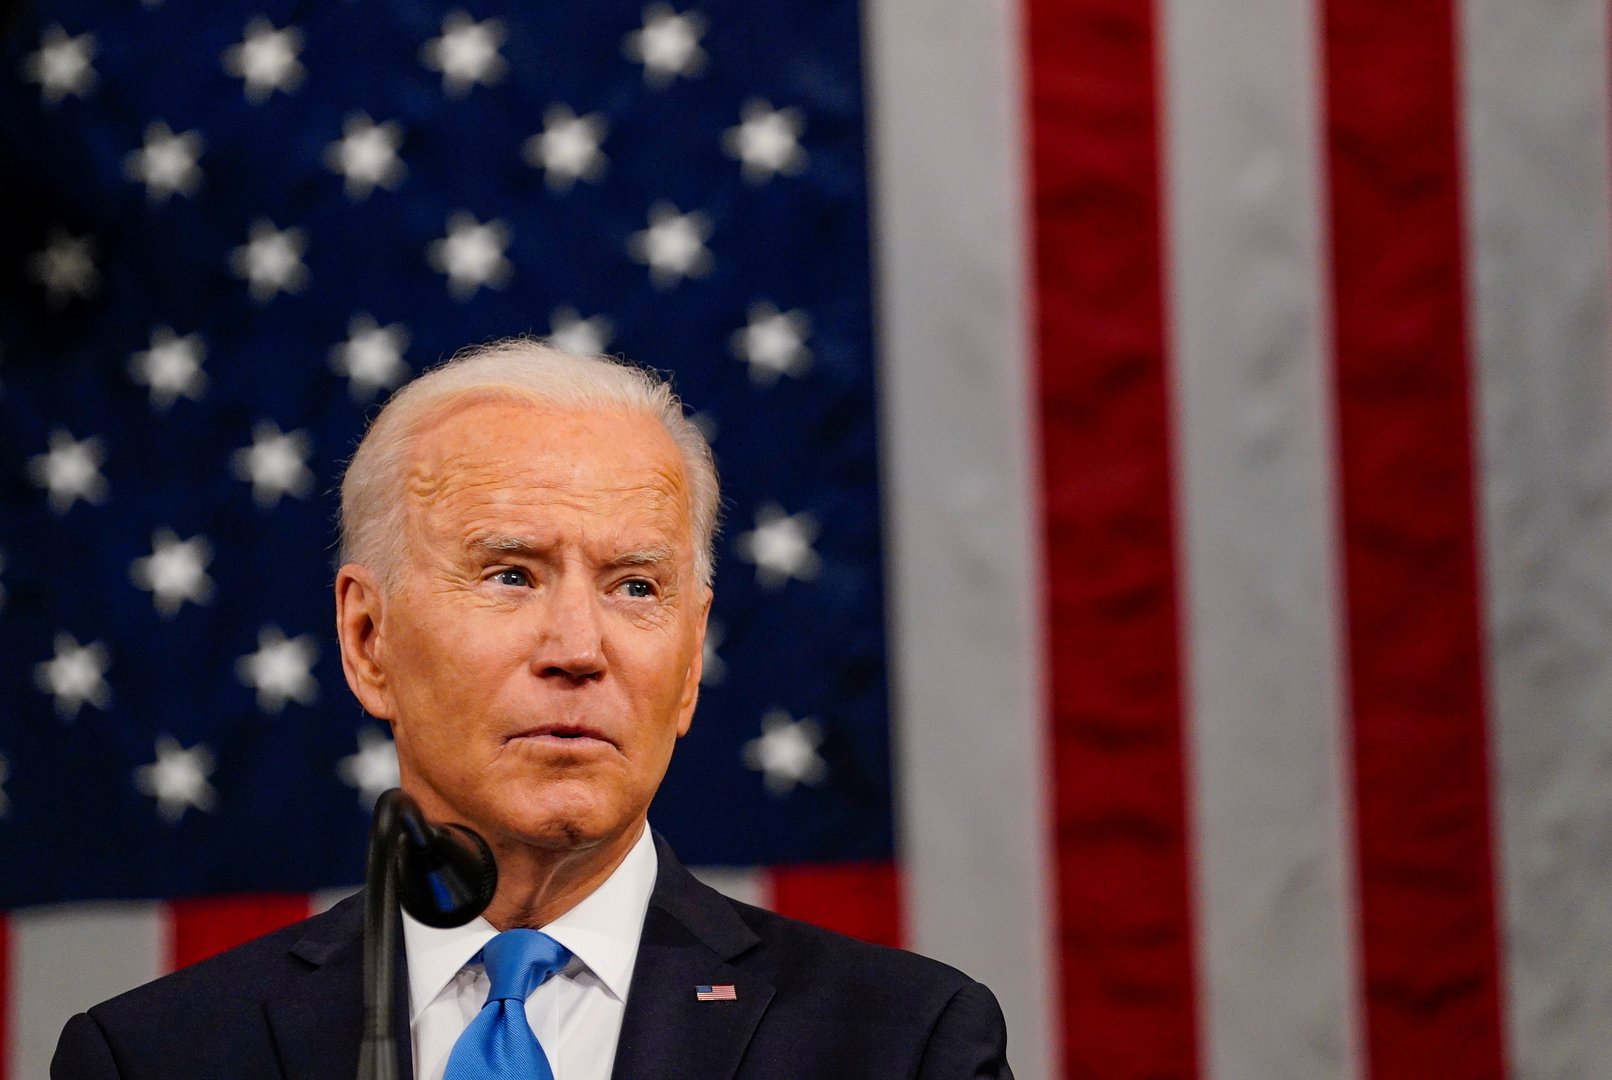 image Biden to push for new taxes, ending extremism in State of the Union speech